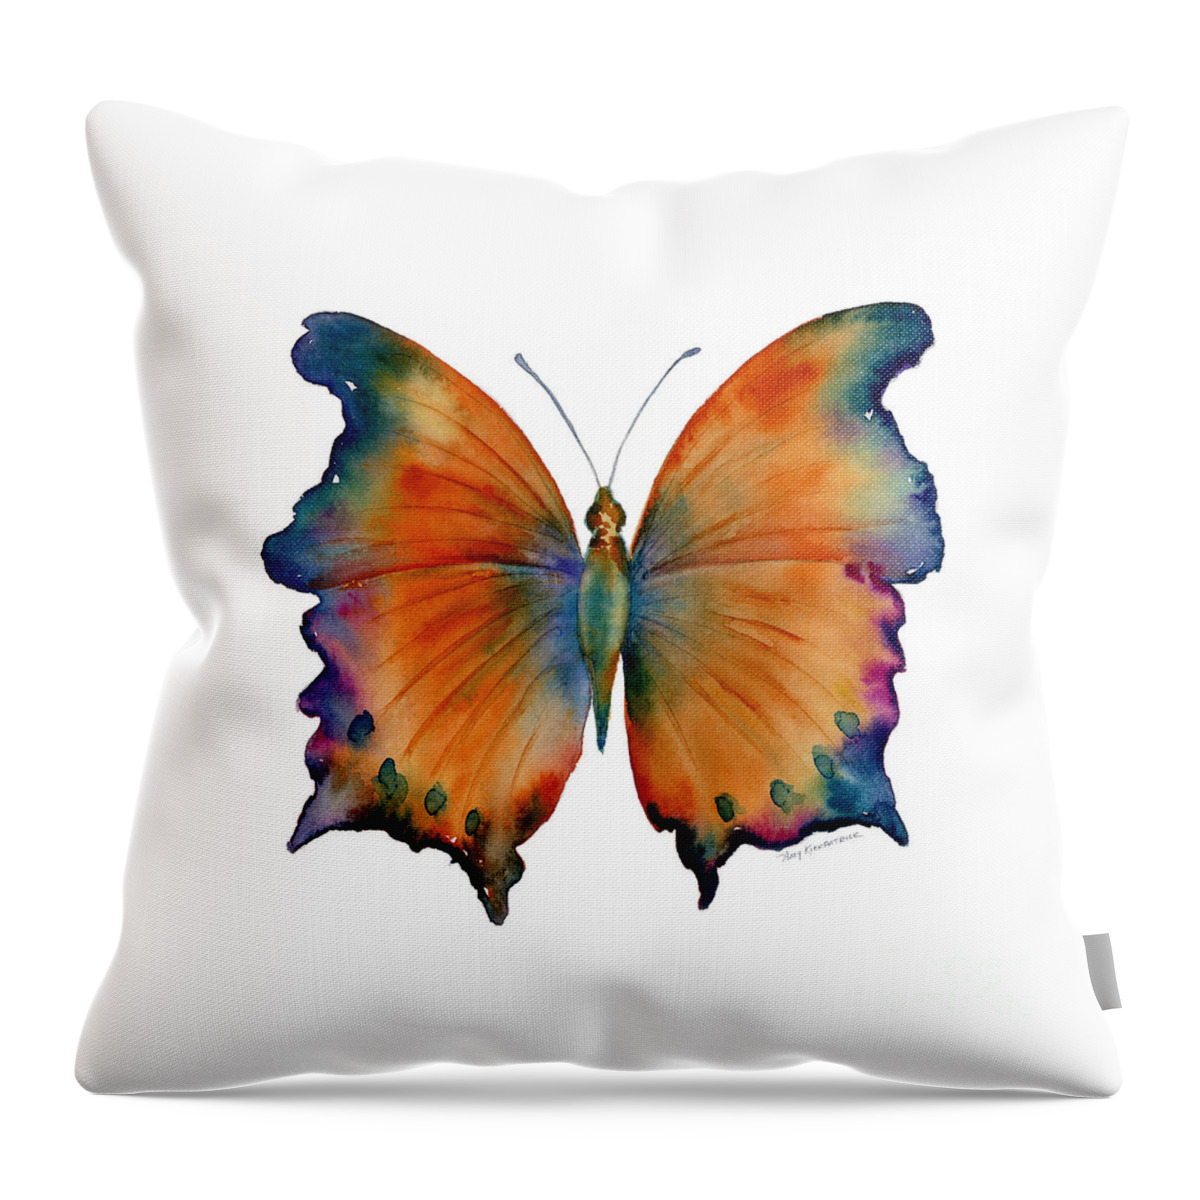 Wizard Butterfly Throw Pillow featuring the painting 1 Wizard Butterfly by Amy Kirkpatrick